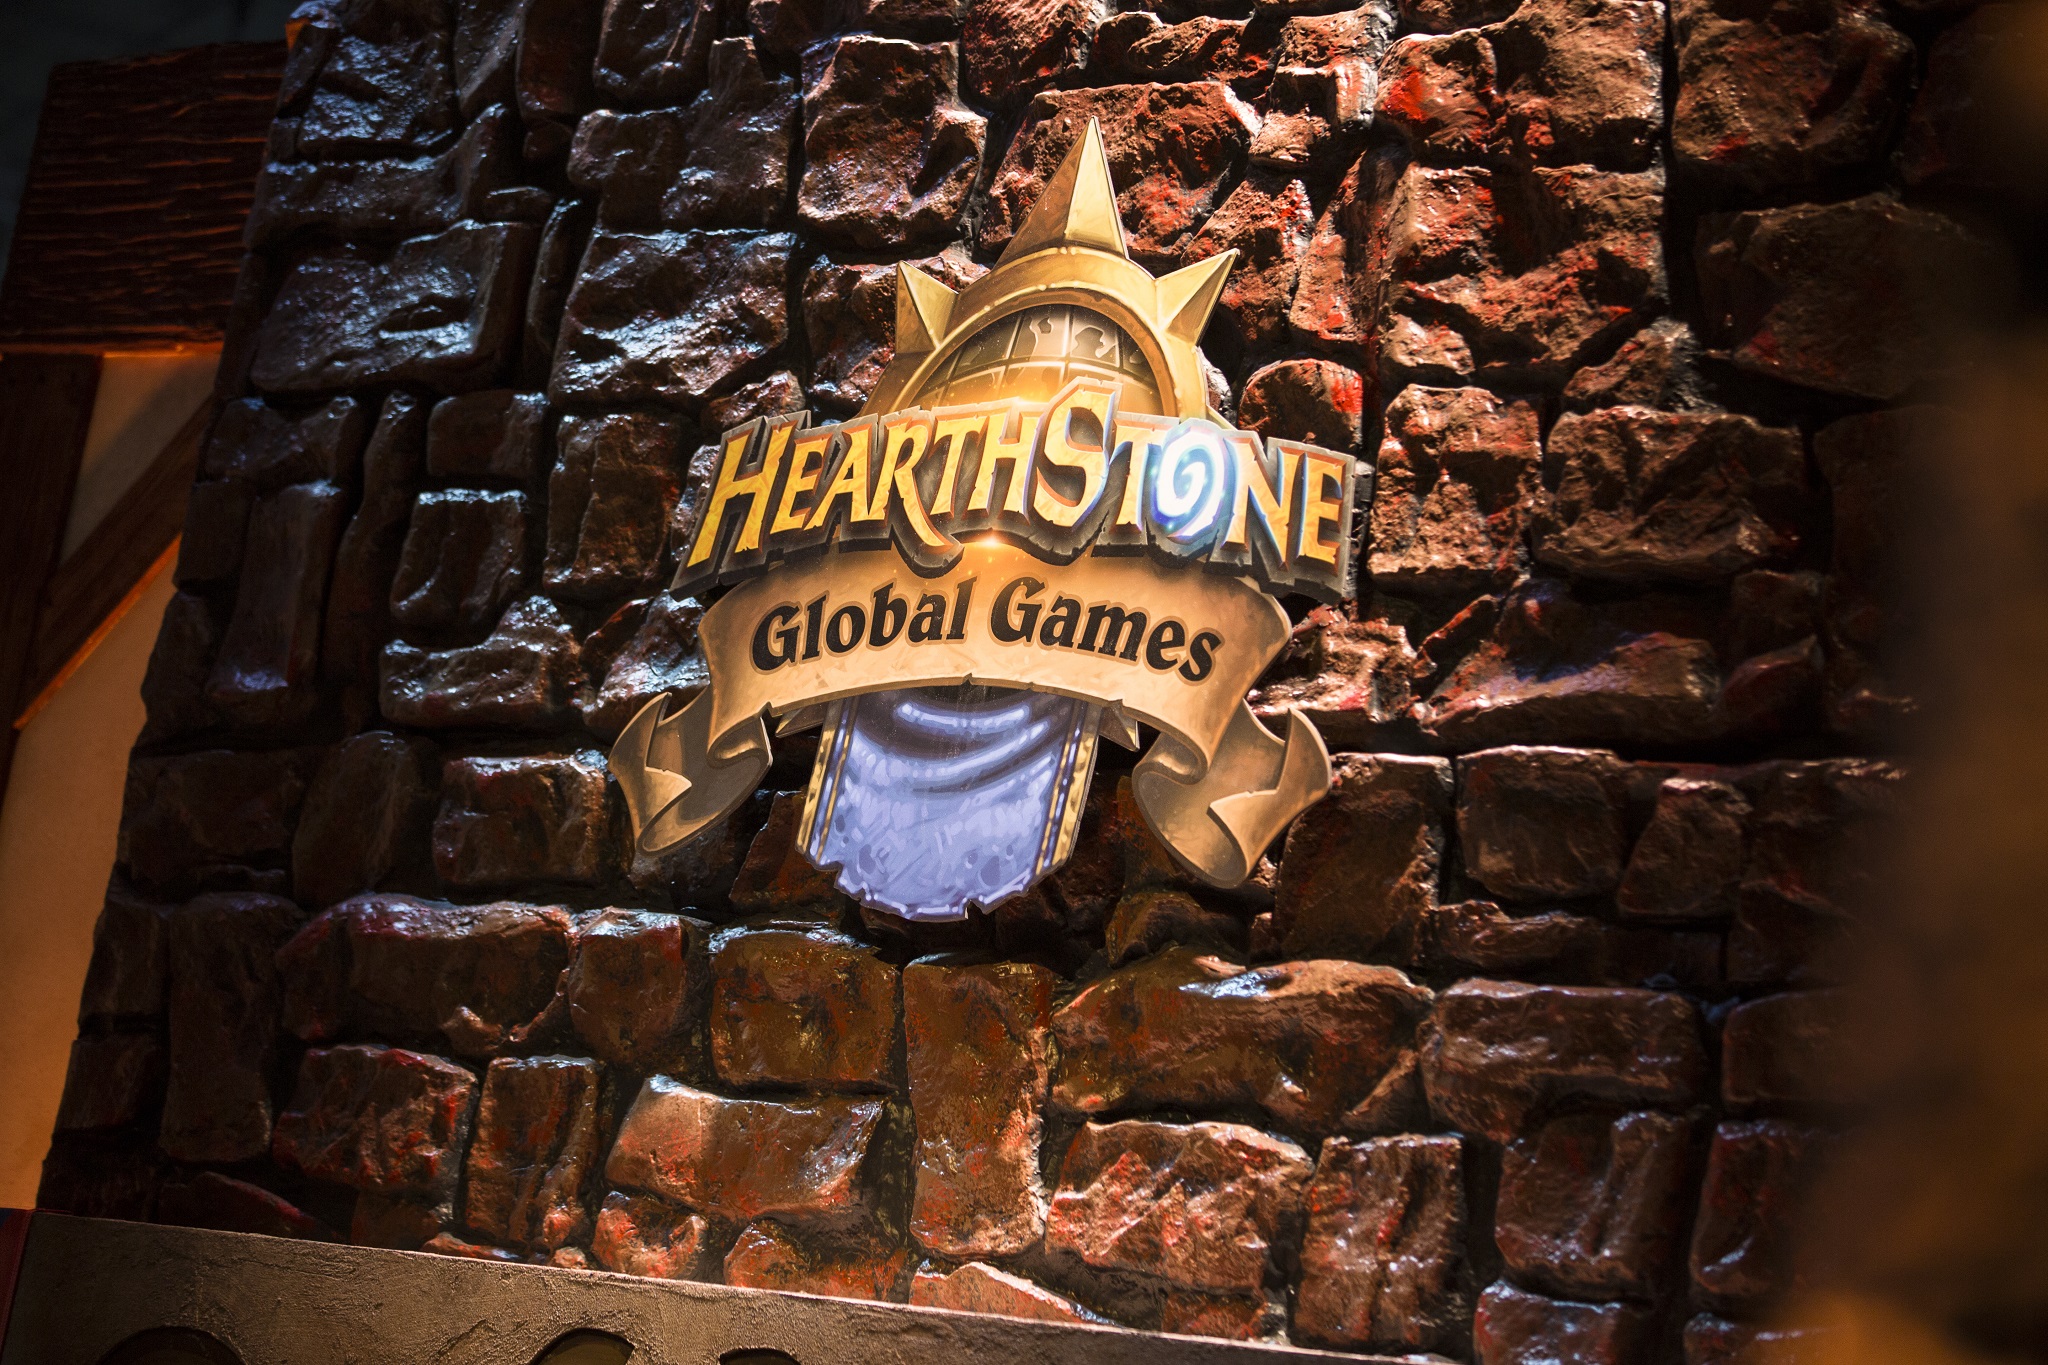 Chinese Taipei disqualified from Hearthstone Global Games